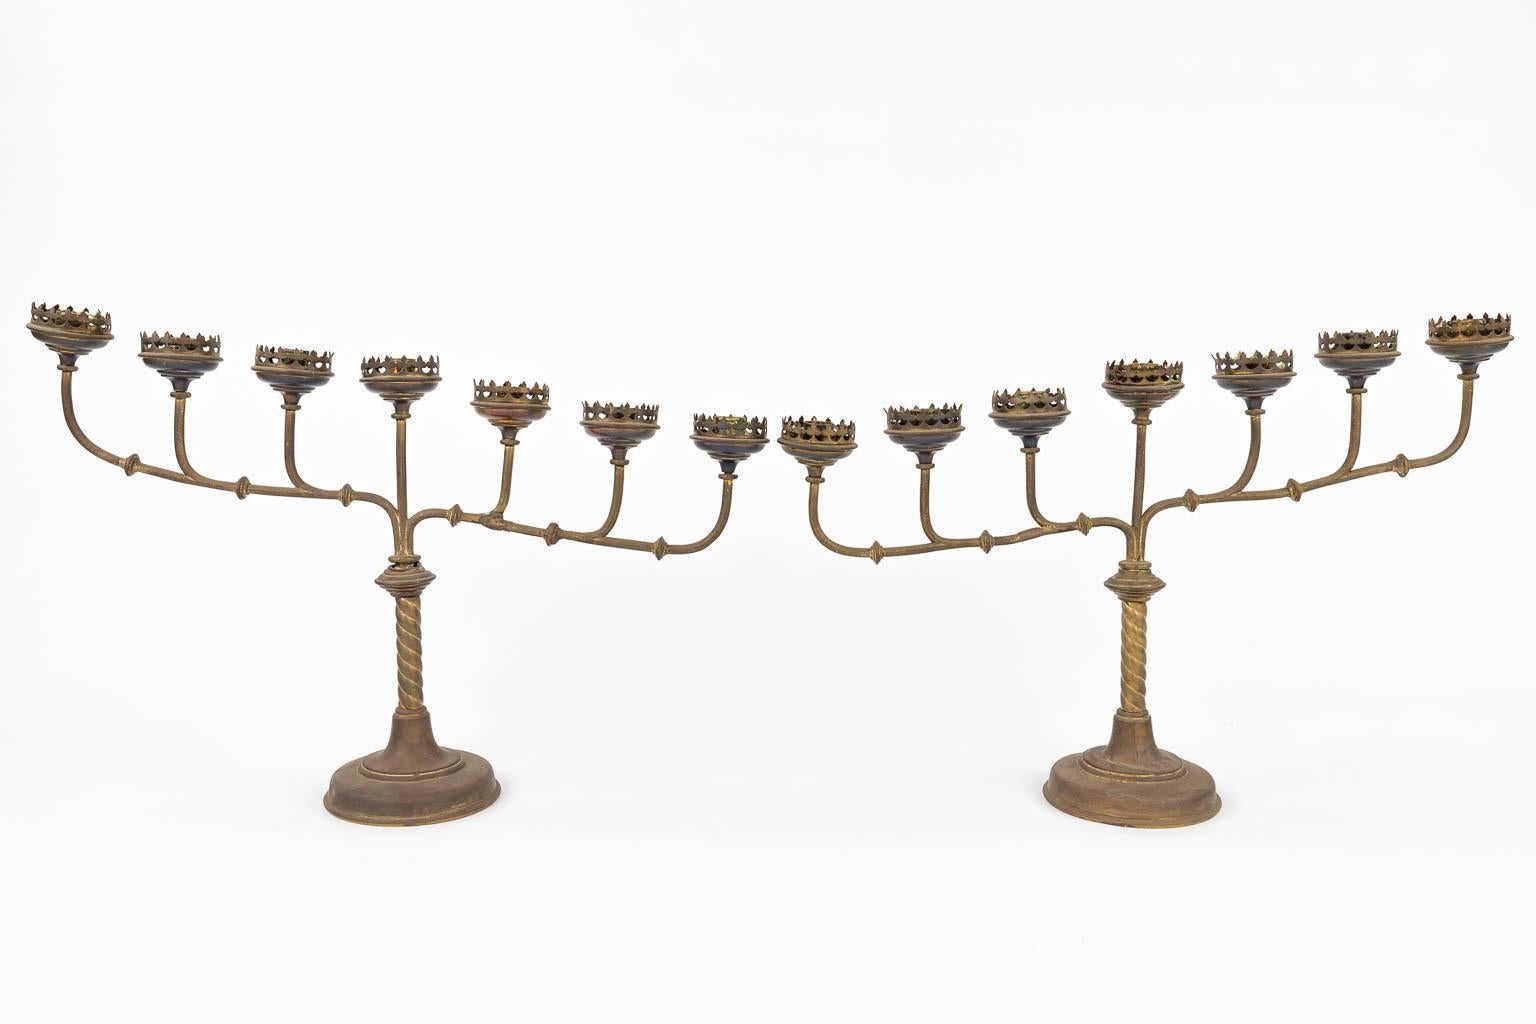 Stunning Pair of 7-candle Gothic Revival Brass Candelabra 

Anonymous
Europe; 19th century
Brass or bronze

Approximate size:  13 (h) x 21 (w) x 4 (d) in.

This pair of European brass or bronze candelabra make a statement in any European styled